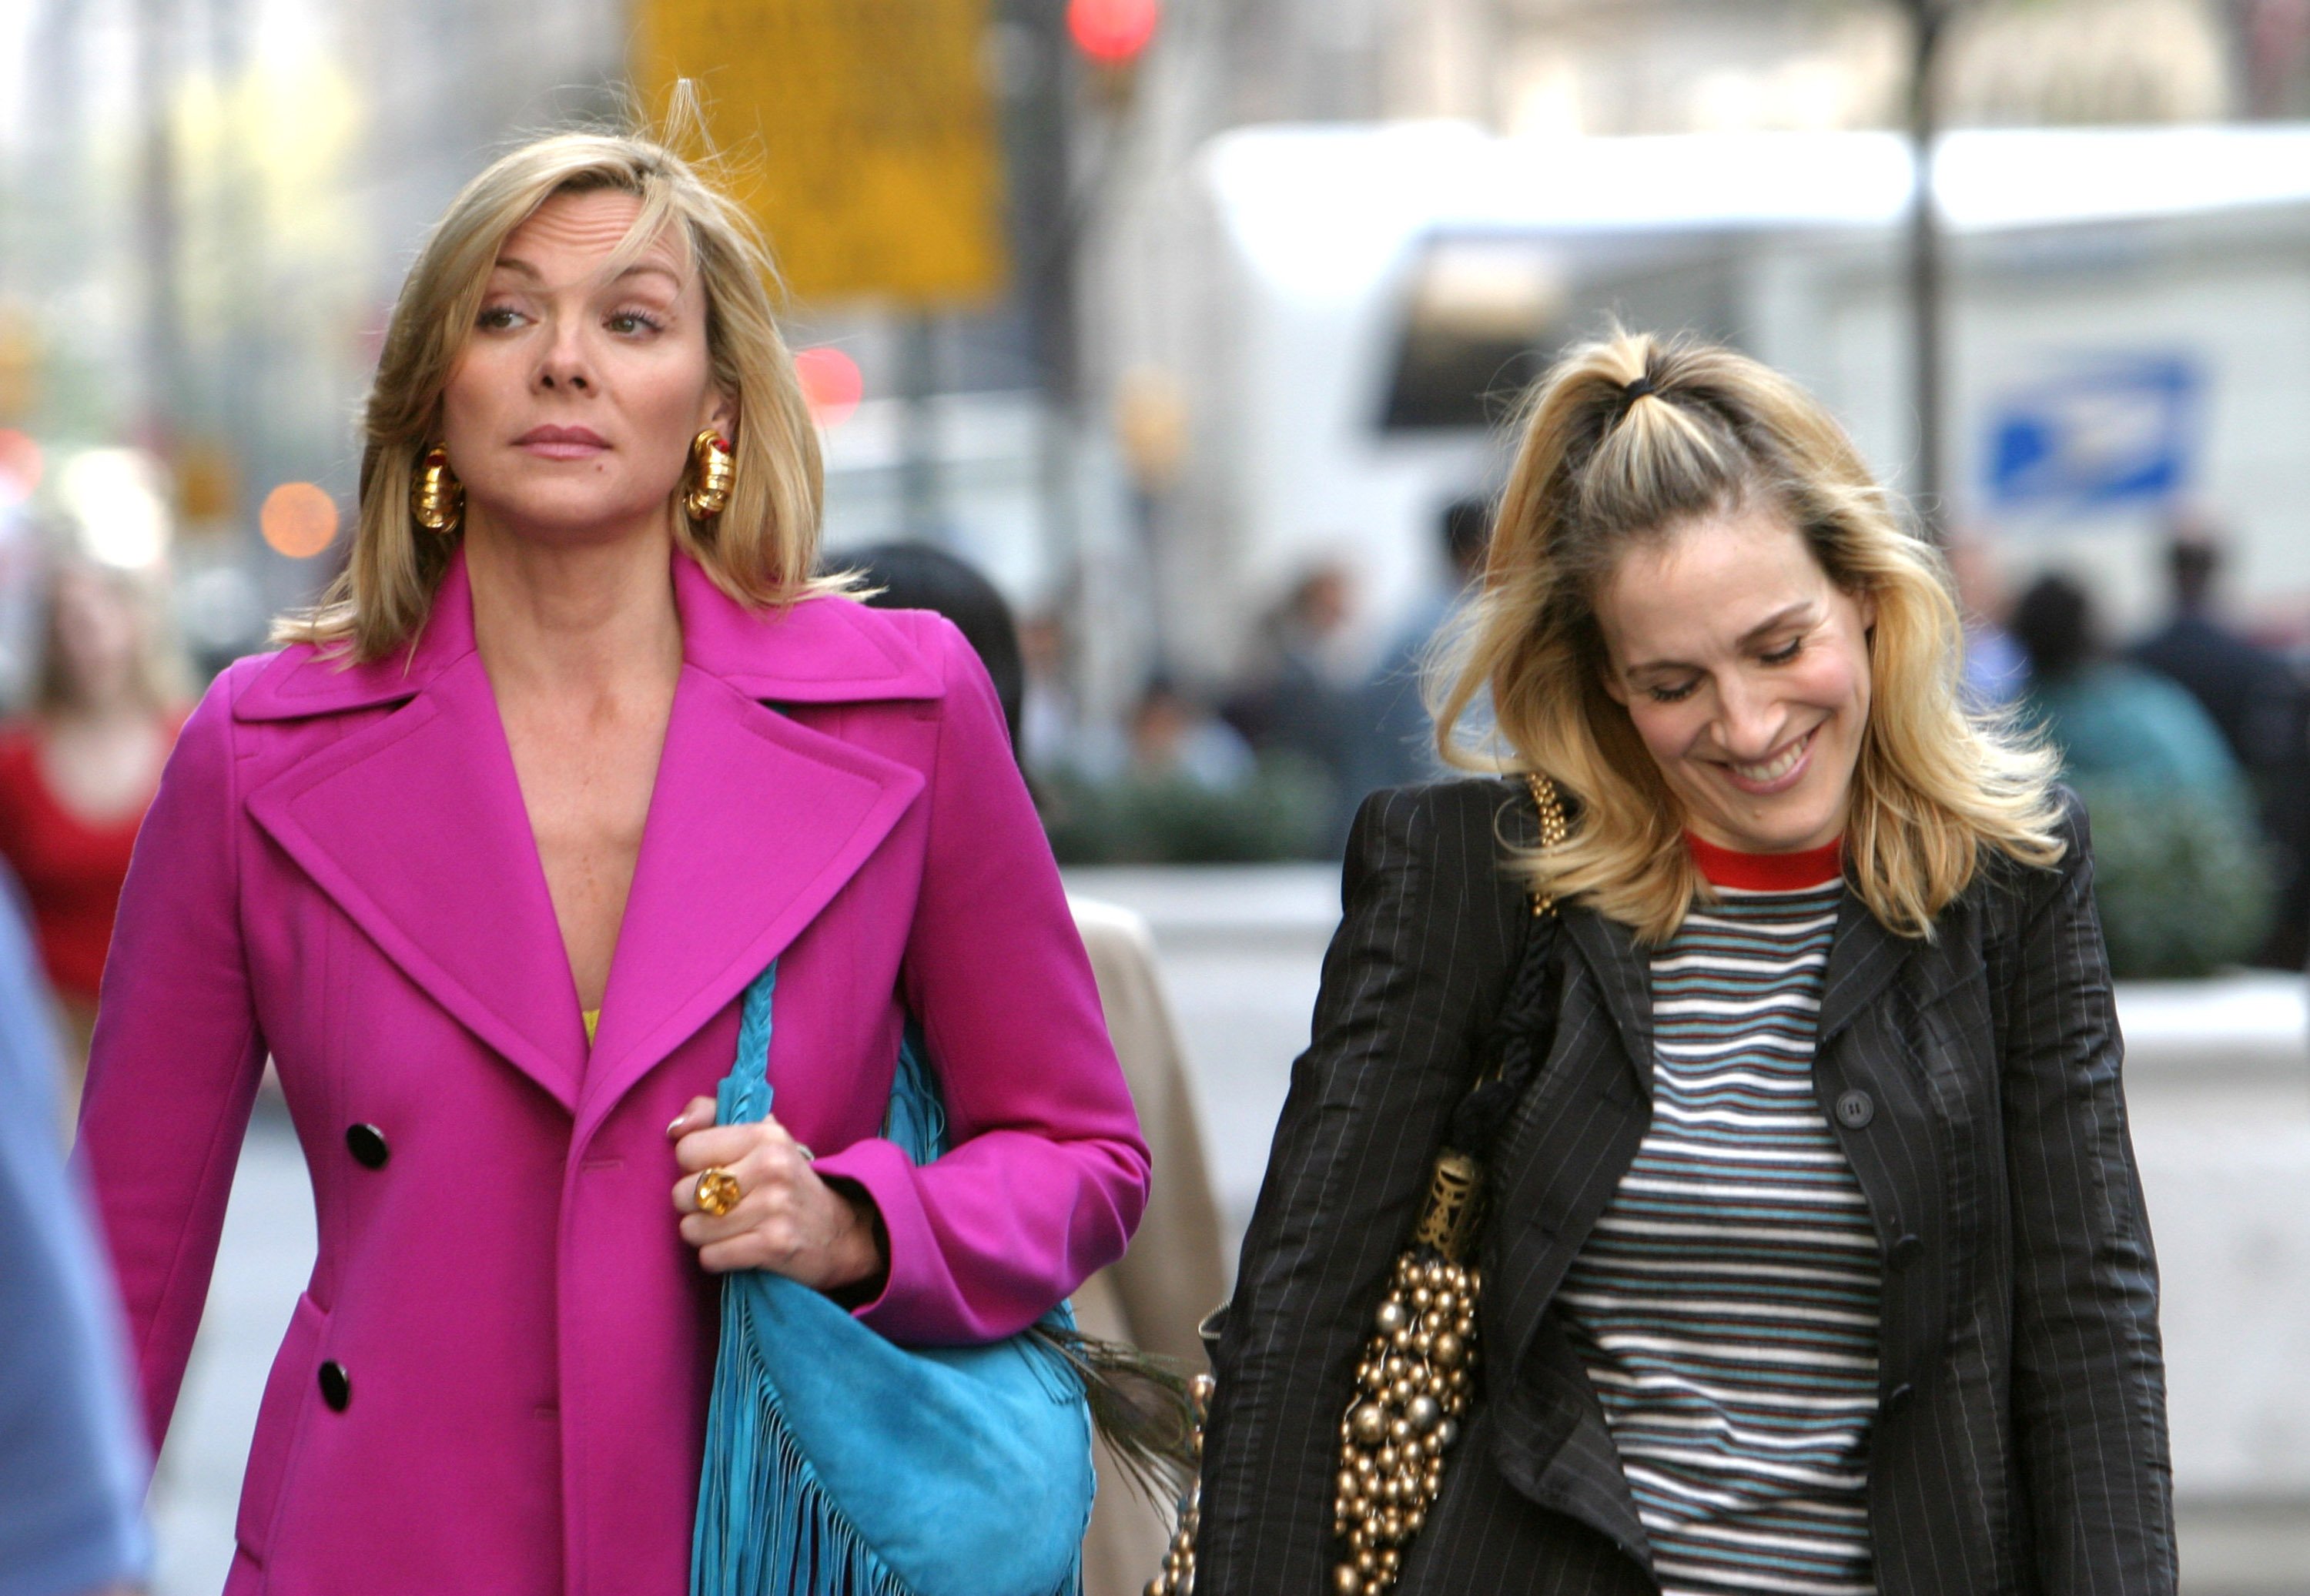 Kim Cattrall as Samantha Jones and Sarah Jessica Parker as Carrie Bradshaw on location in New York City